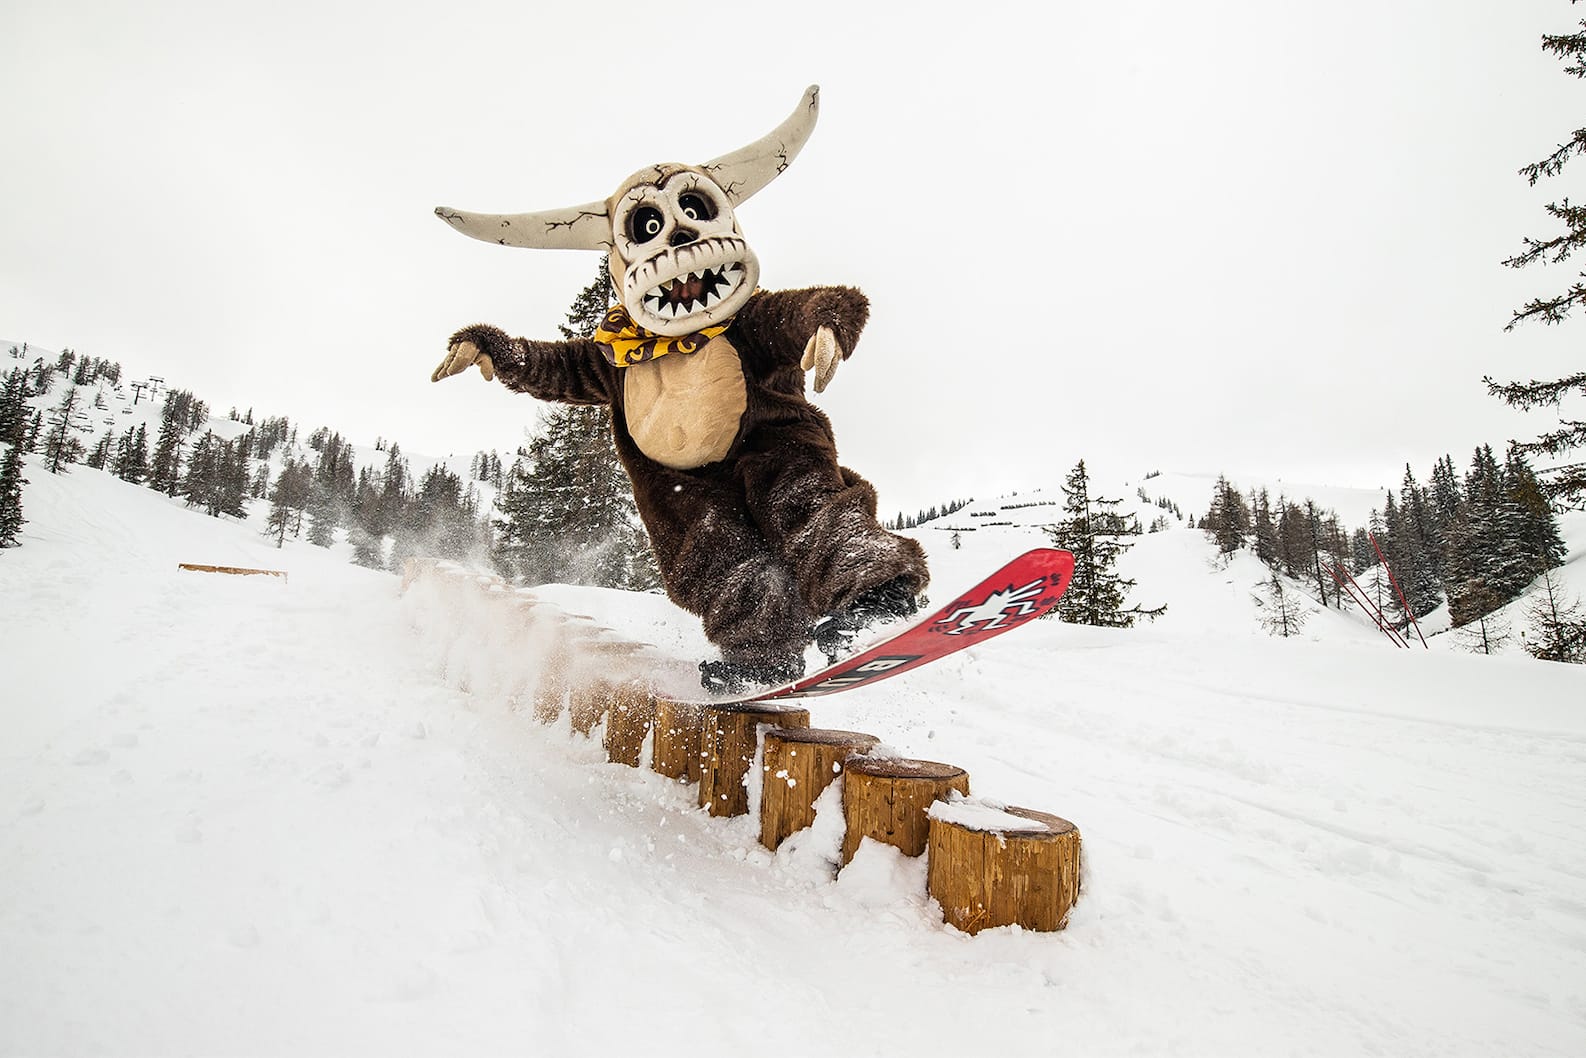 The Stash Snowboard Parks | Snowboards